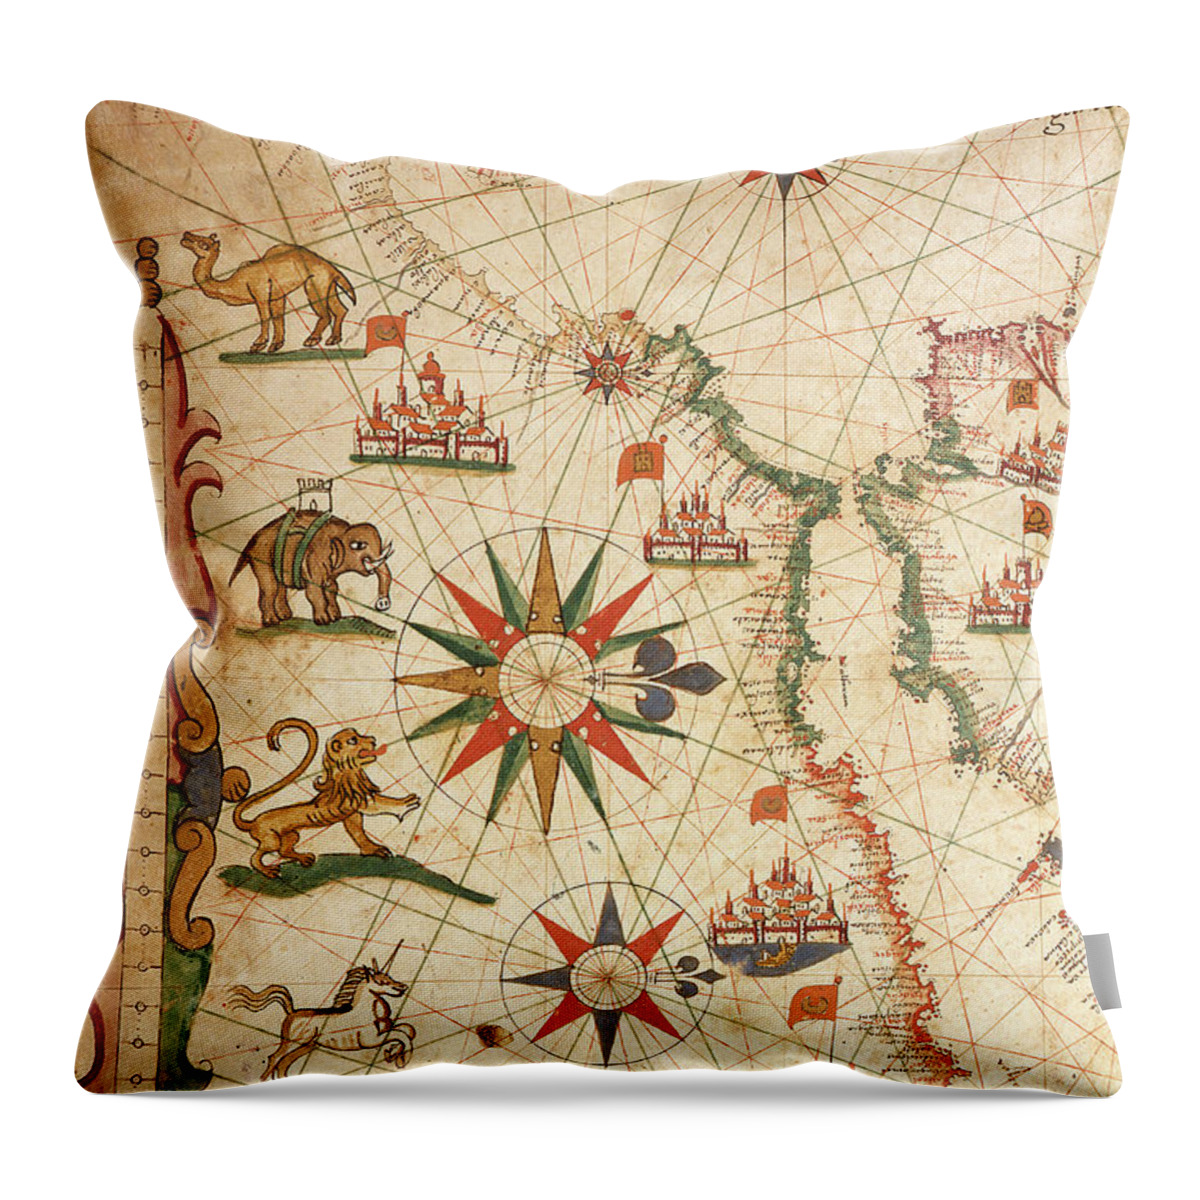 Unicorn Throw Pillow featuring the drawing The Atlantic coasts of Europe and the Western Mediterranean, from a nautical atlas, 1651 by Pietro Giovanni Prunes